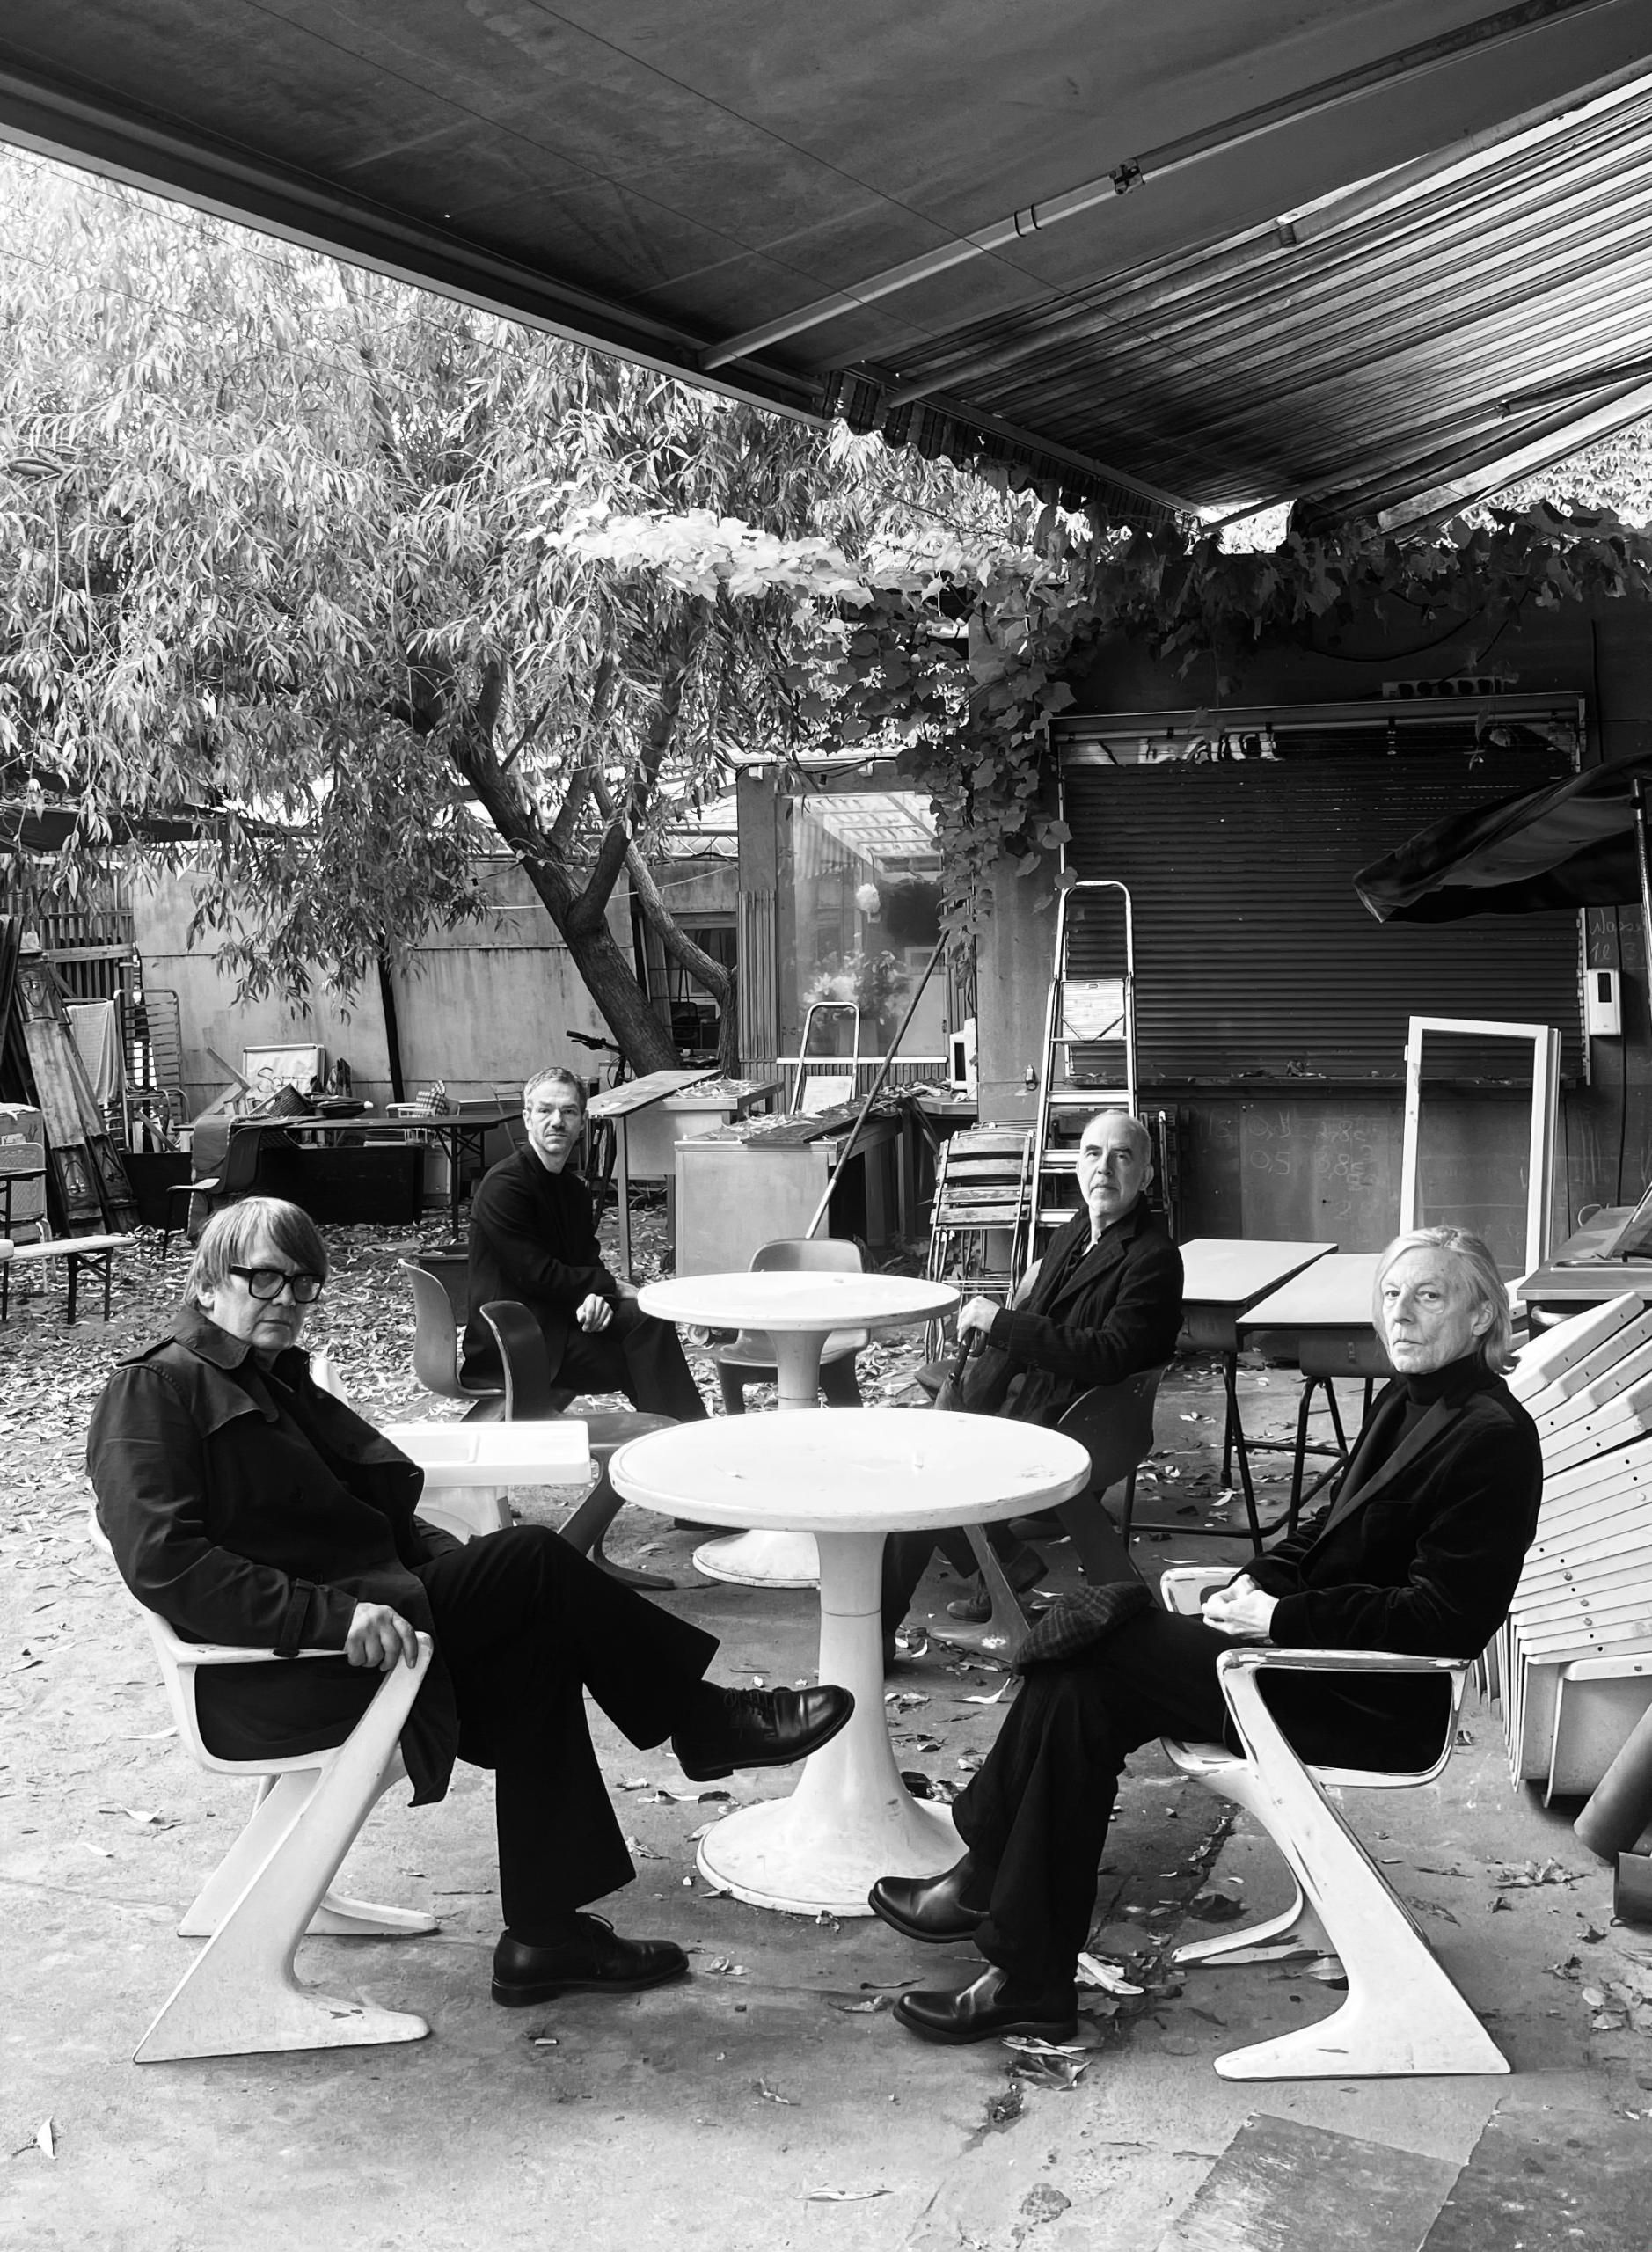 The 4 musicians of the band Element of Crime are sitting on chairs around two small tables under an eaves. A garden can be seen in the background.